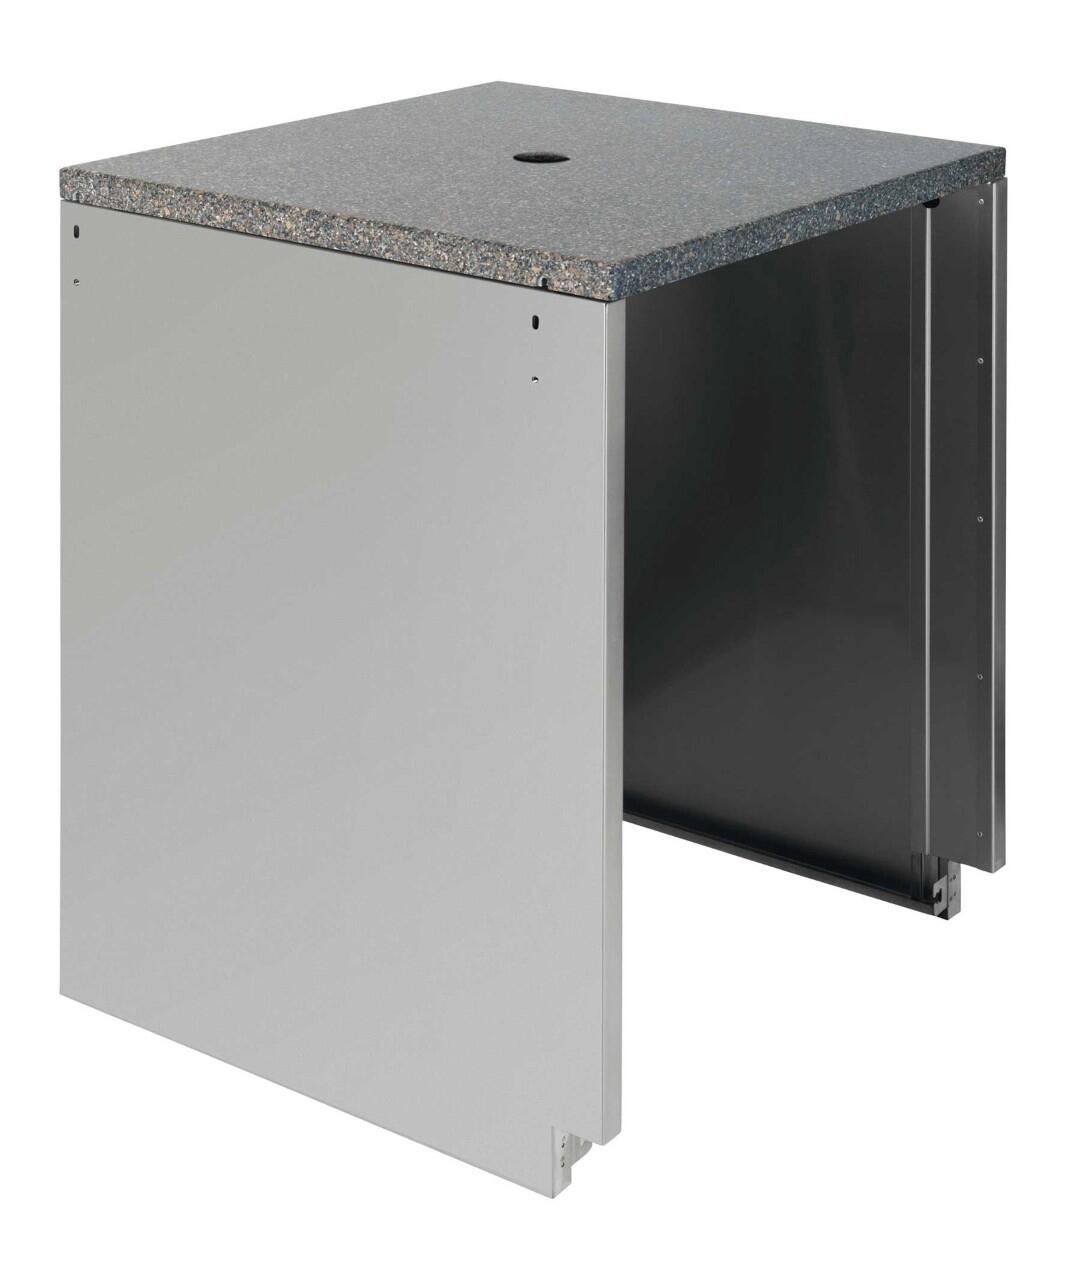 Dcs WR24RTD Liberty Wrapper: Outdoor Refrig, Drawer, Keg Tap